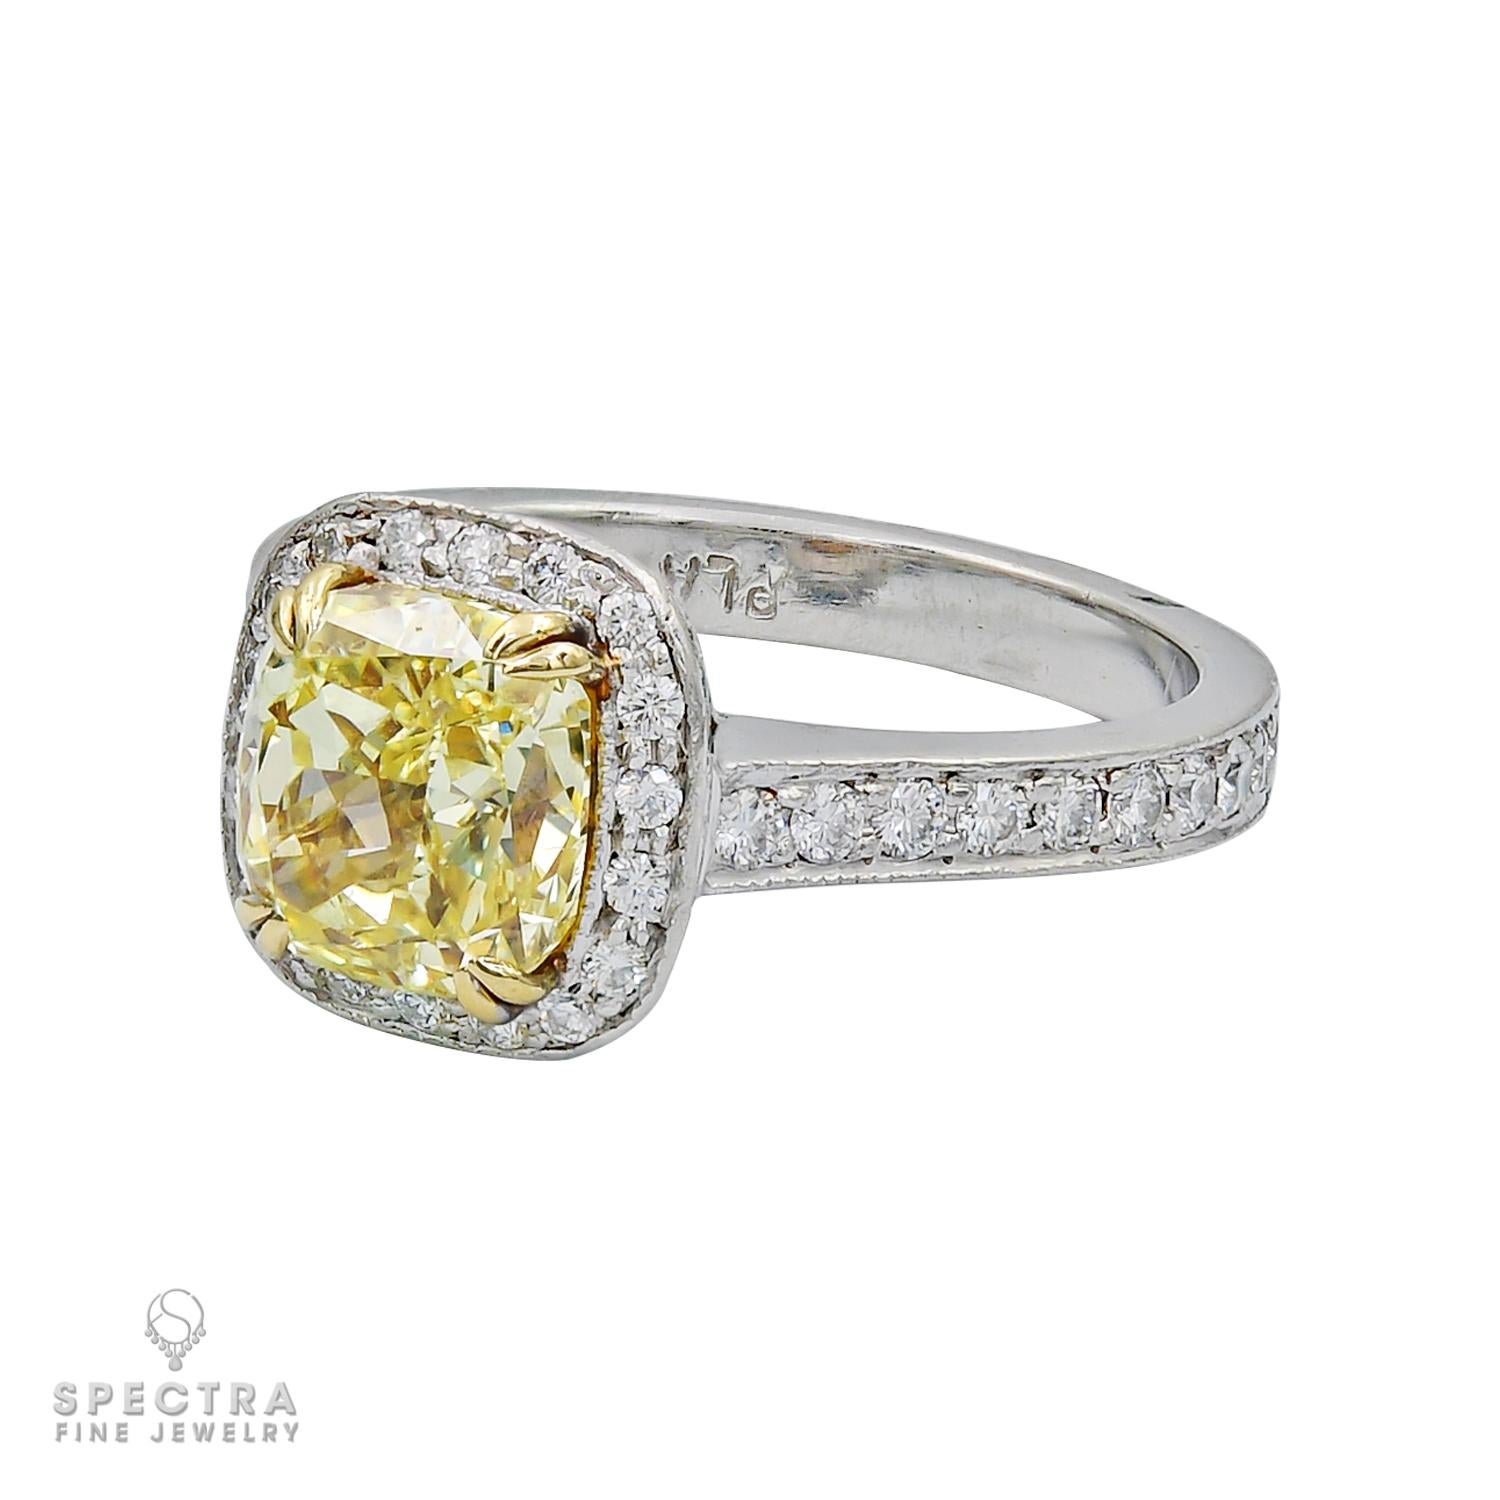 A beautiful engagement/cocktail ring set with a radiant-cut diamond, weighing a total of 2.45 carats. 
The diamond is certified by GIA lab, stating that it is a natural diamond of fancy intense yellow color and even distribution.
The center stone is